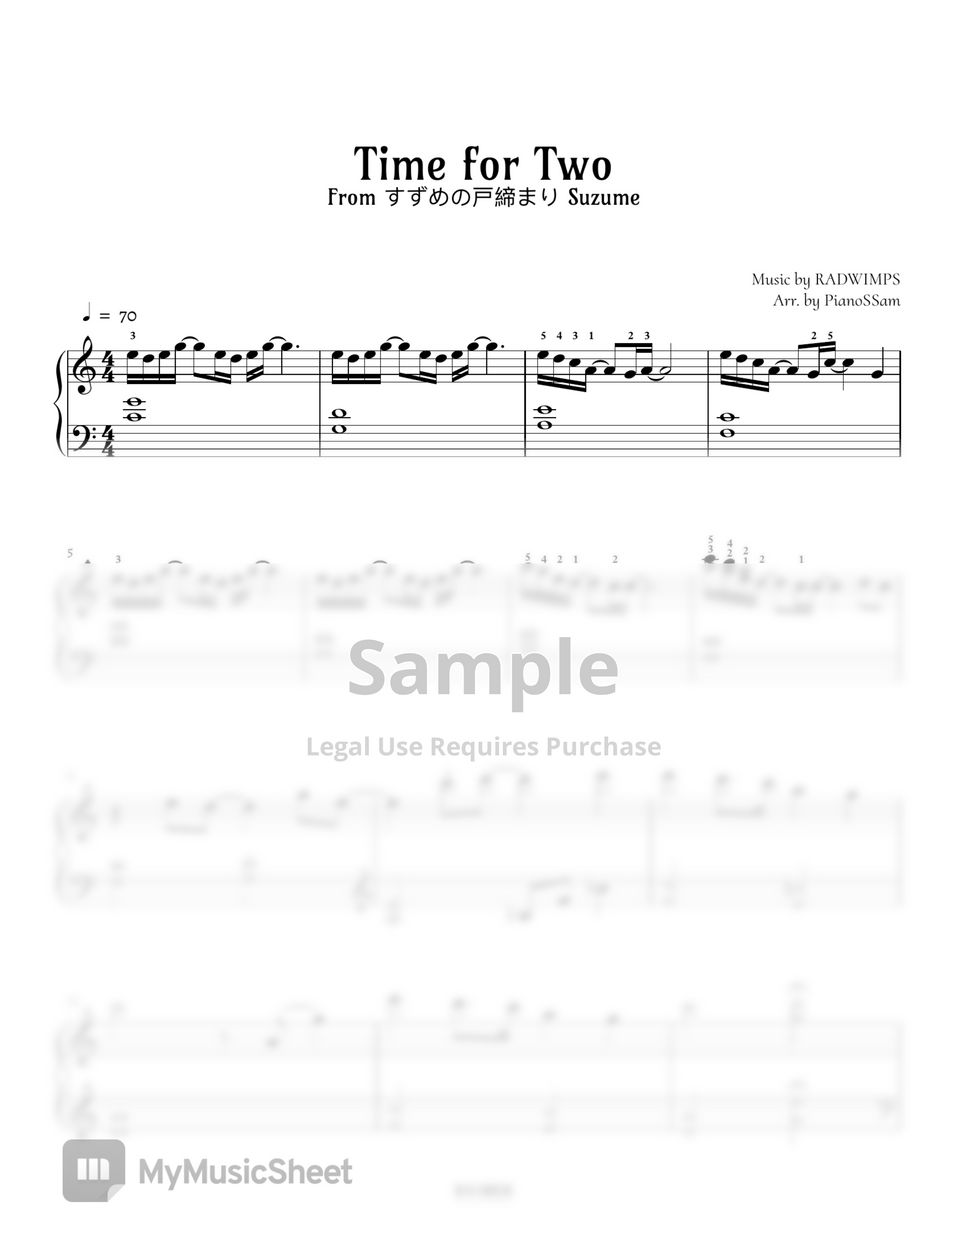 RADWIMP - Time for Two (스즈메의 문단속) by PianoSSam